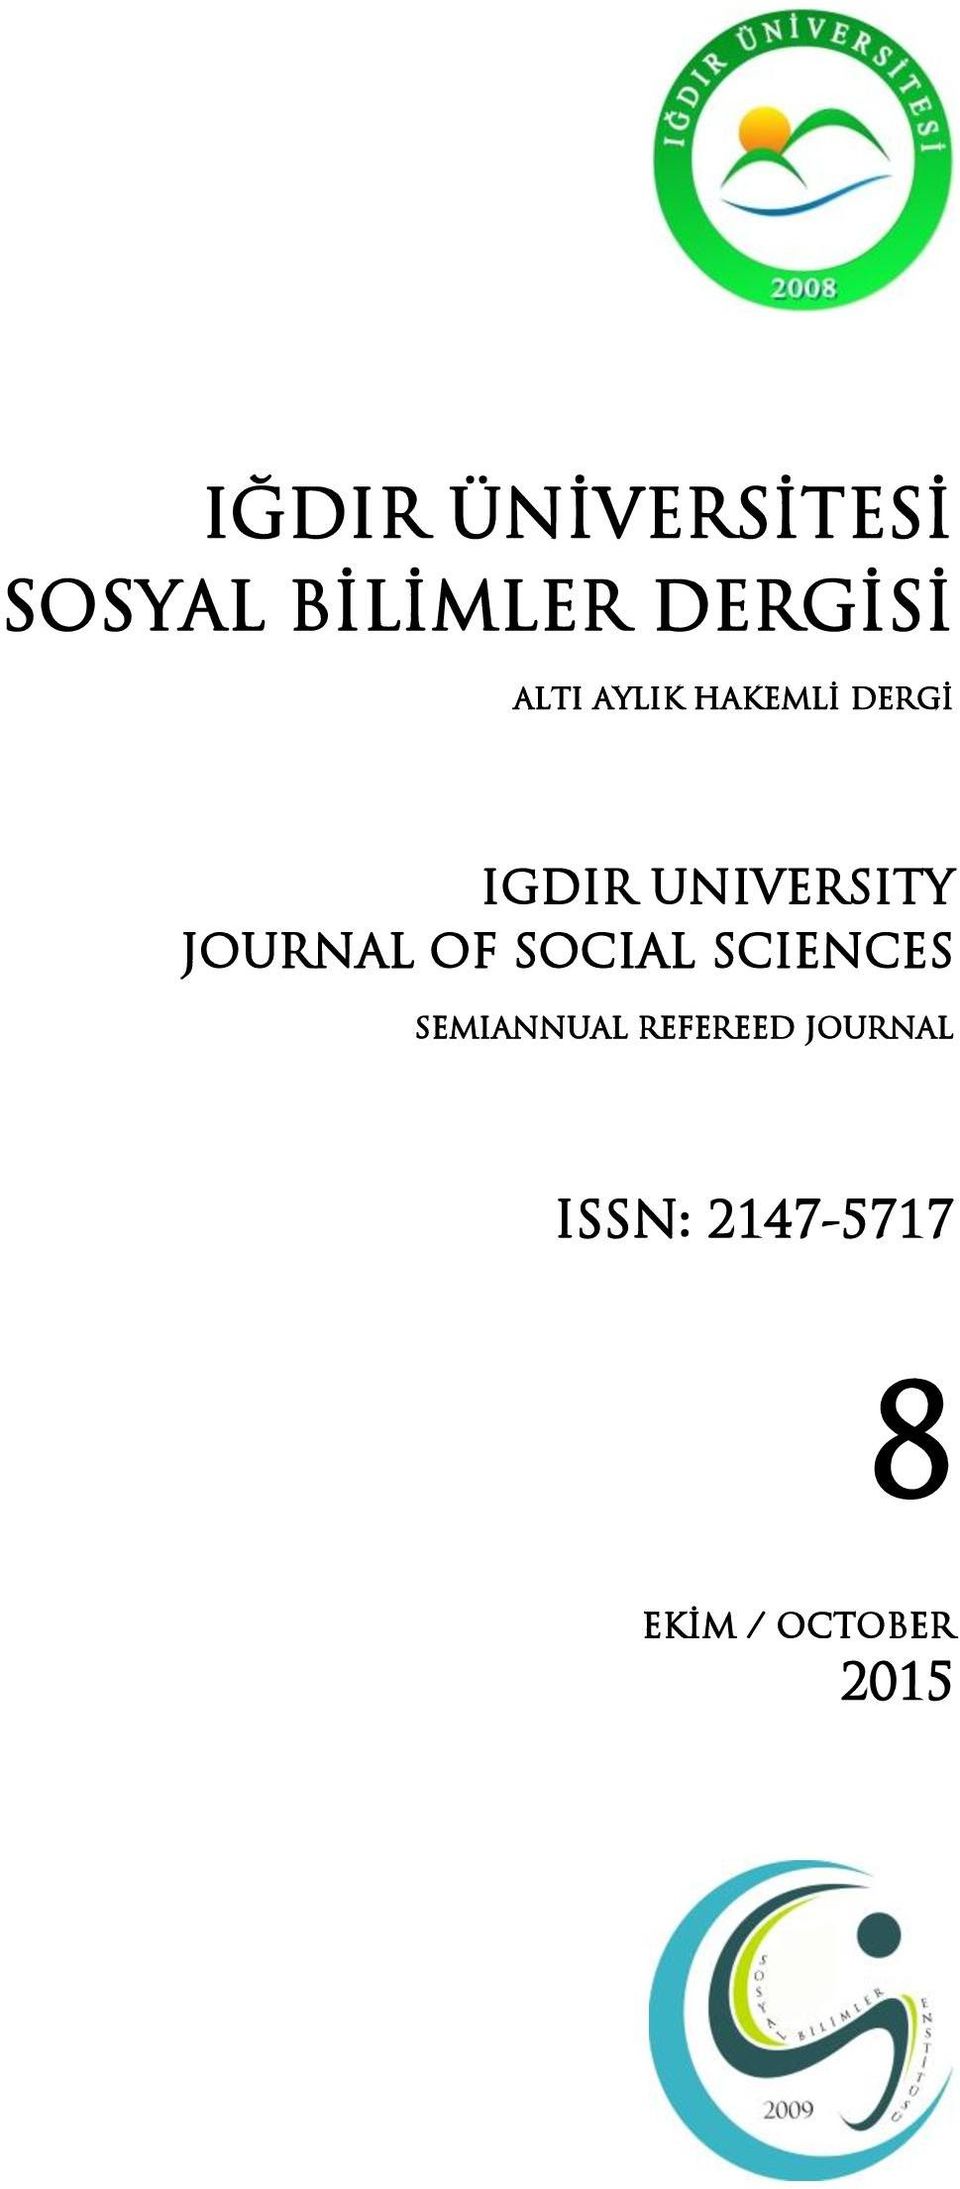 JOURNAL OF SOCIAL SCIENCES SEMIANNUAL